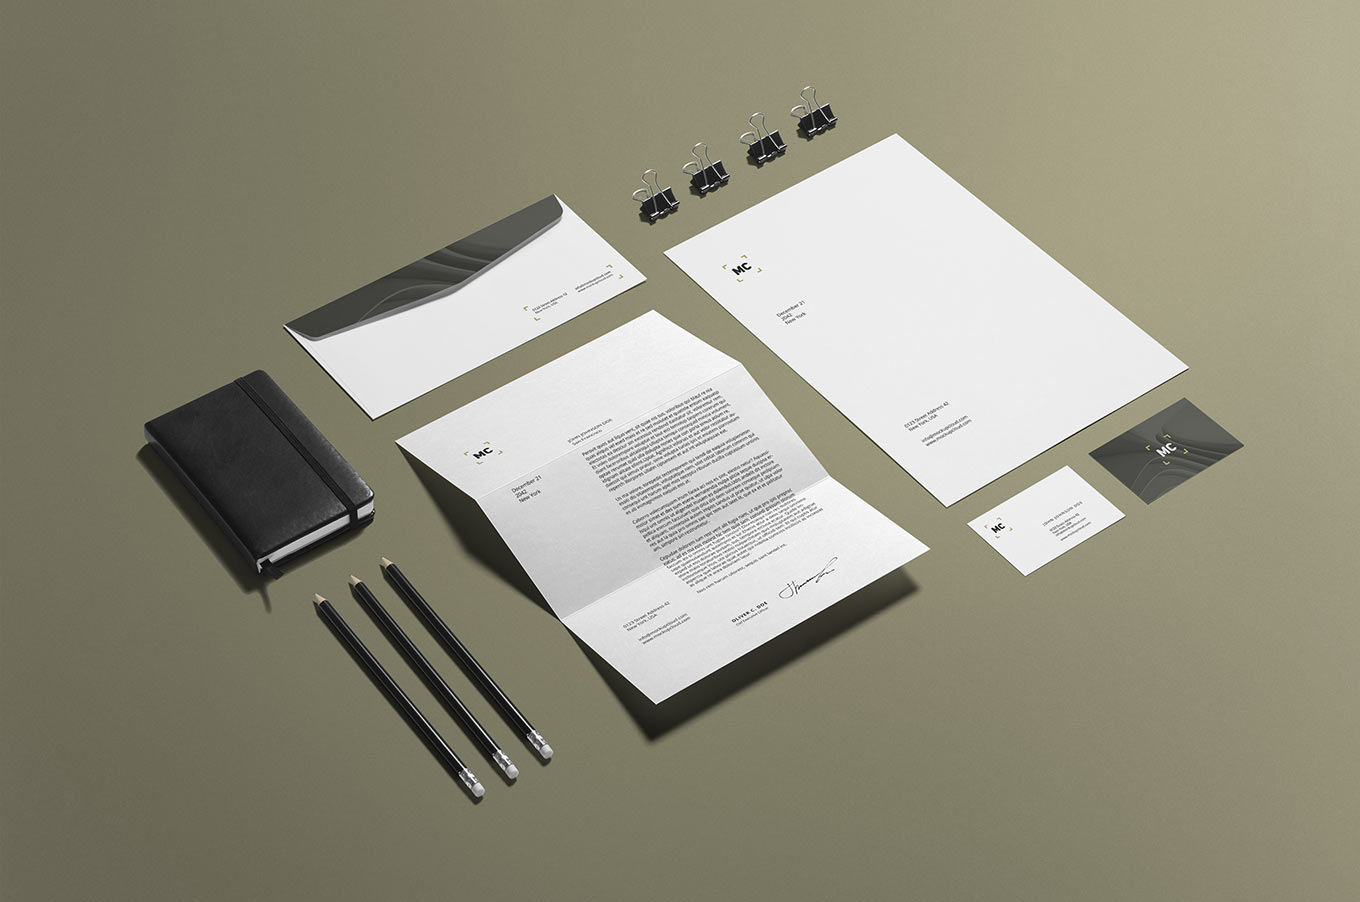 Clean design mockup of business stationery, notebook, pencils and clips